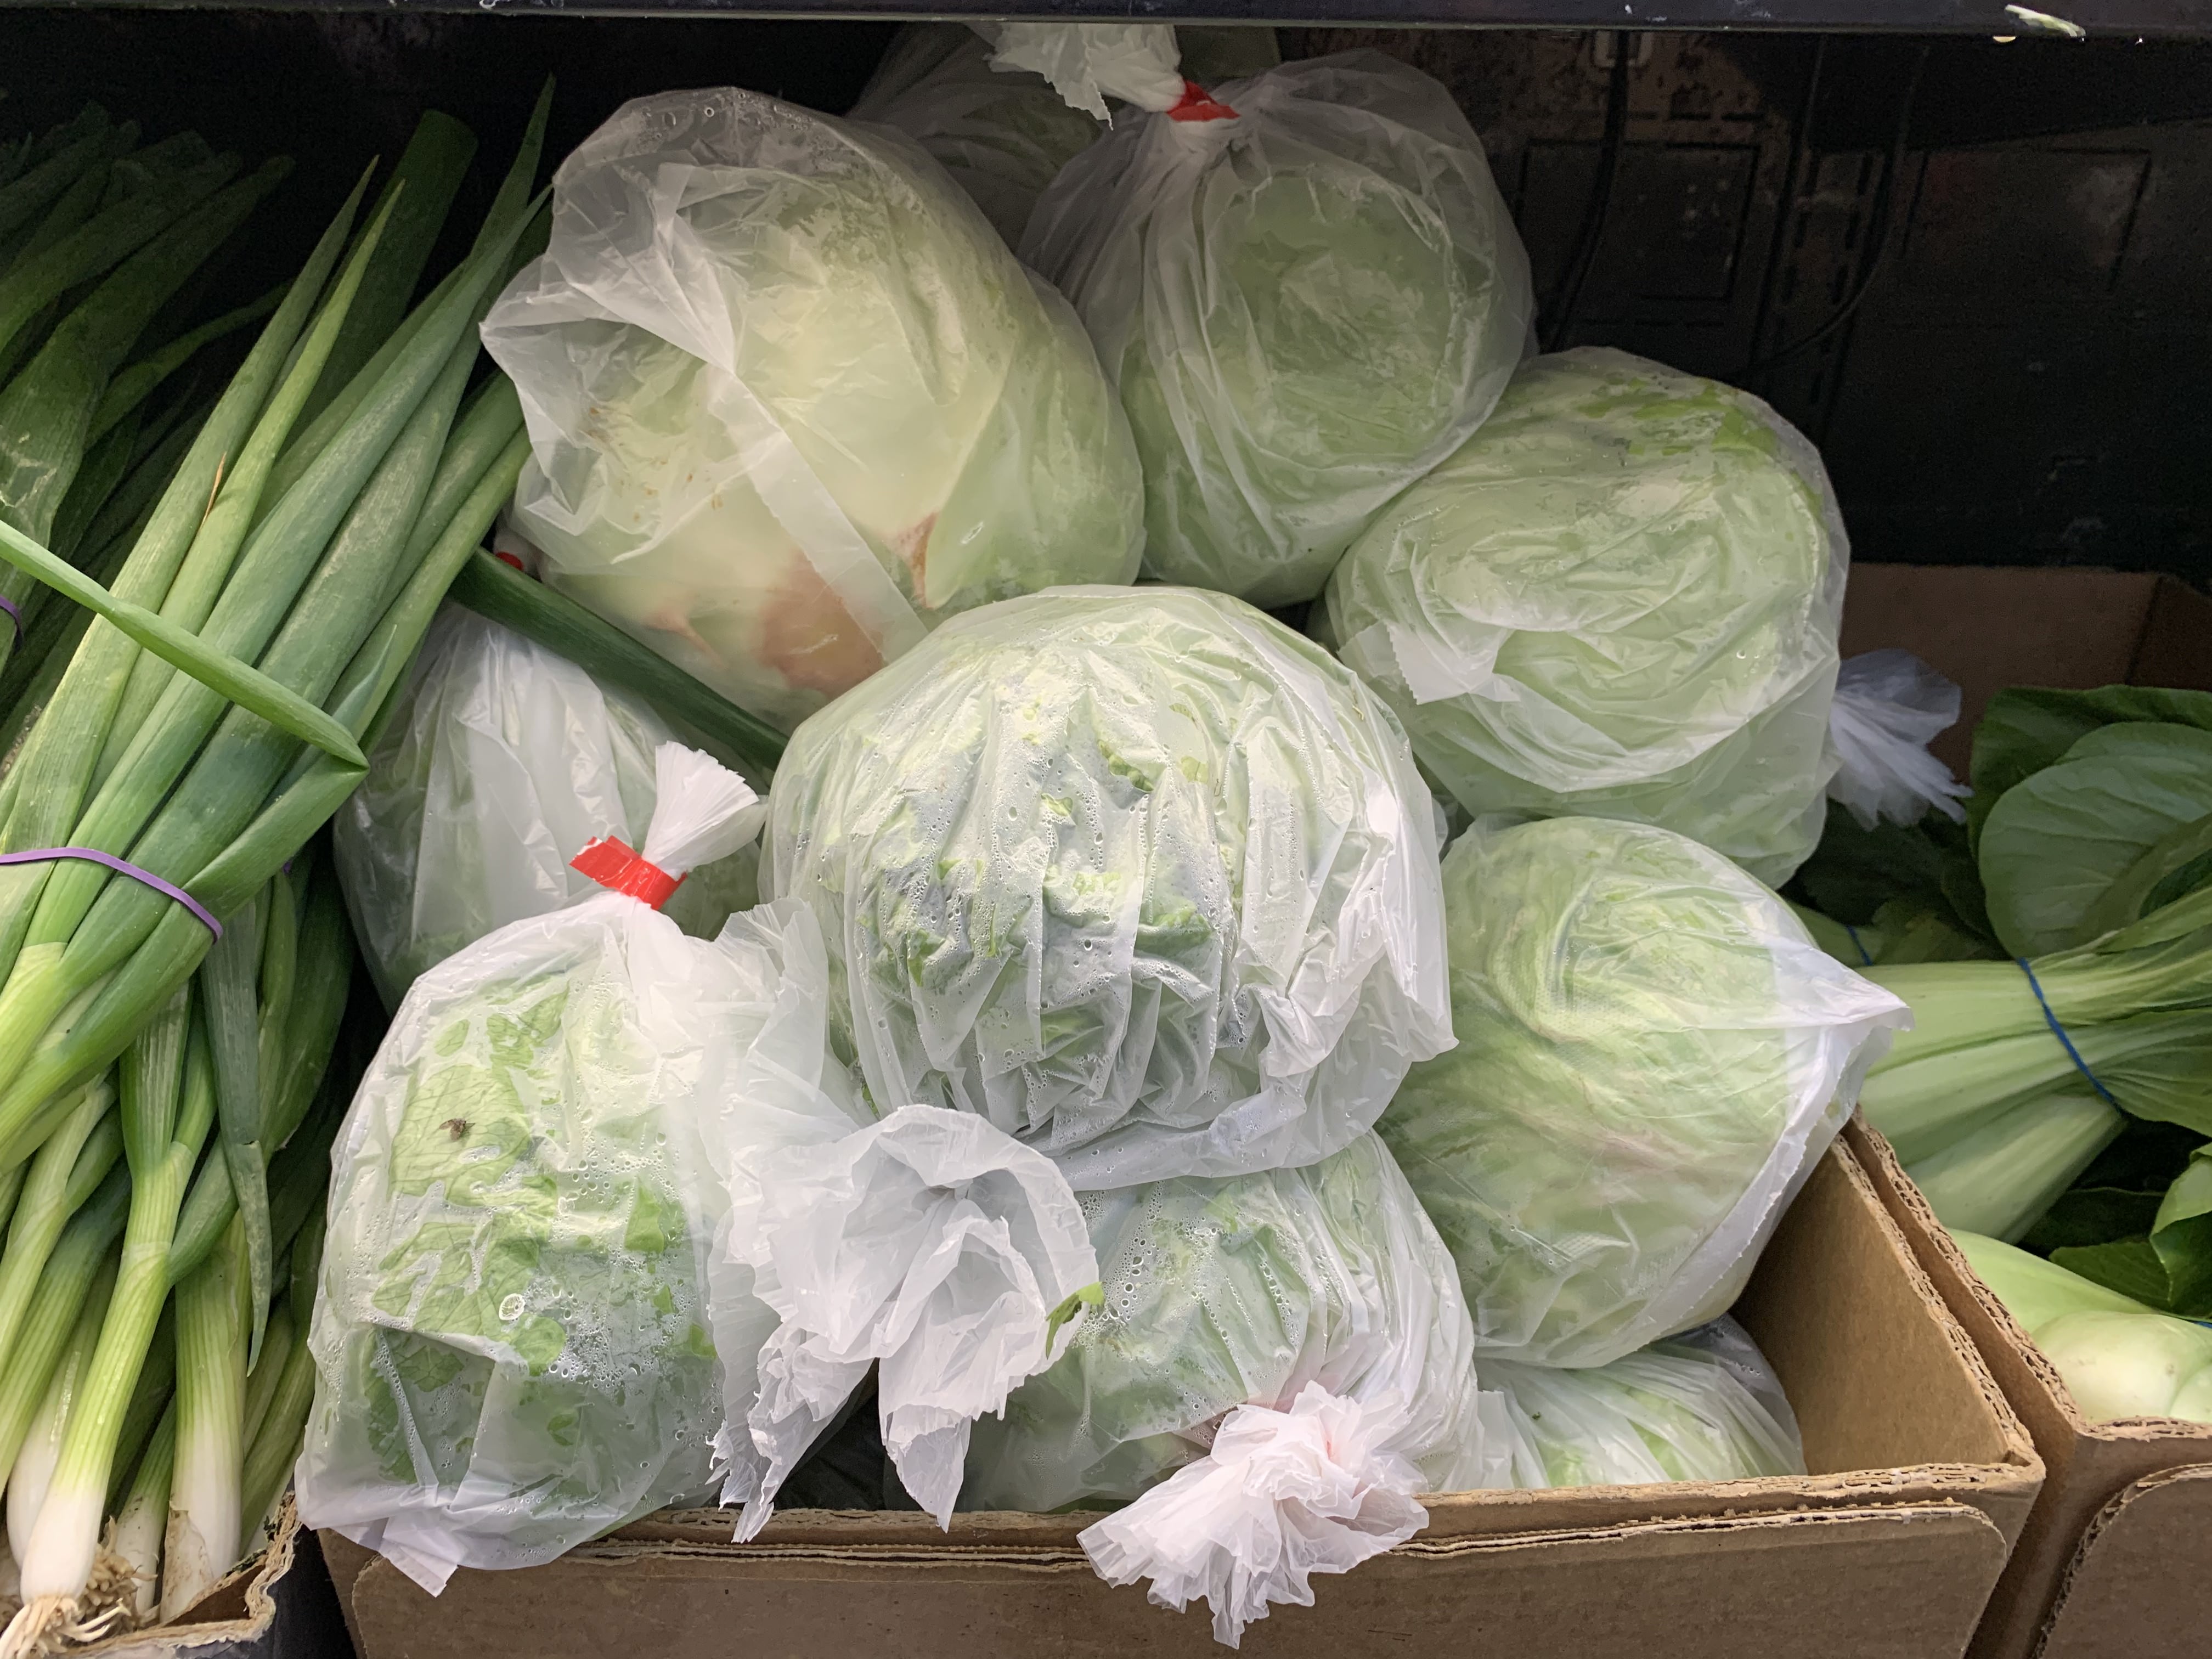 Lettuces wrapped in plastic bags at an Asian grocery story. 